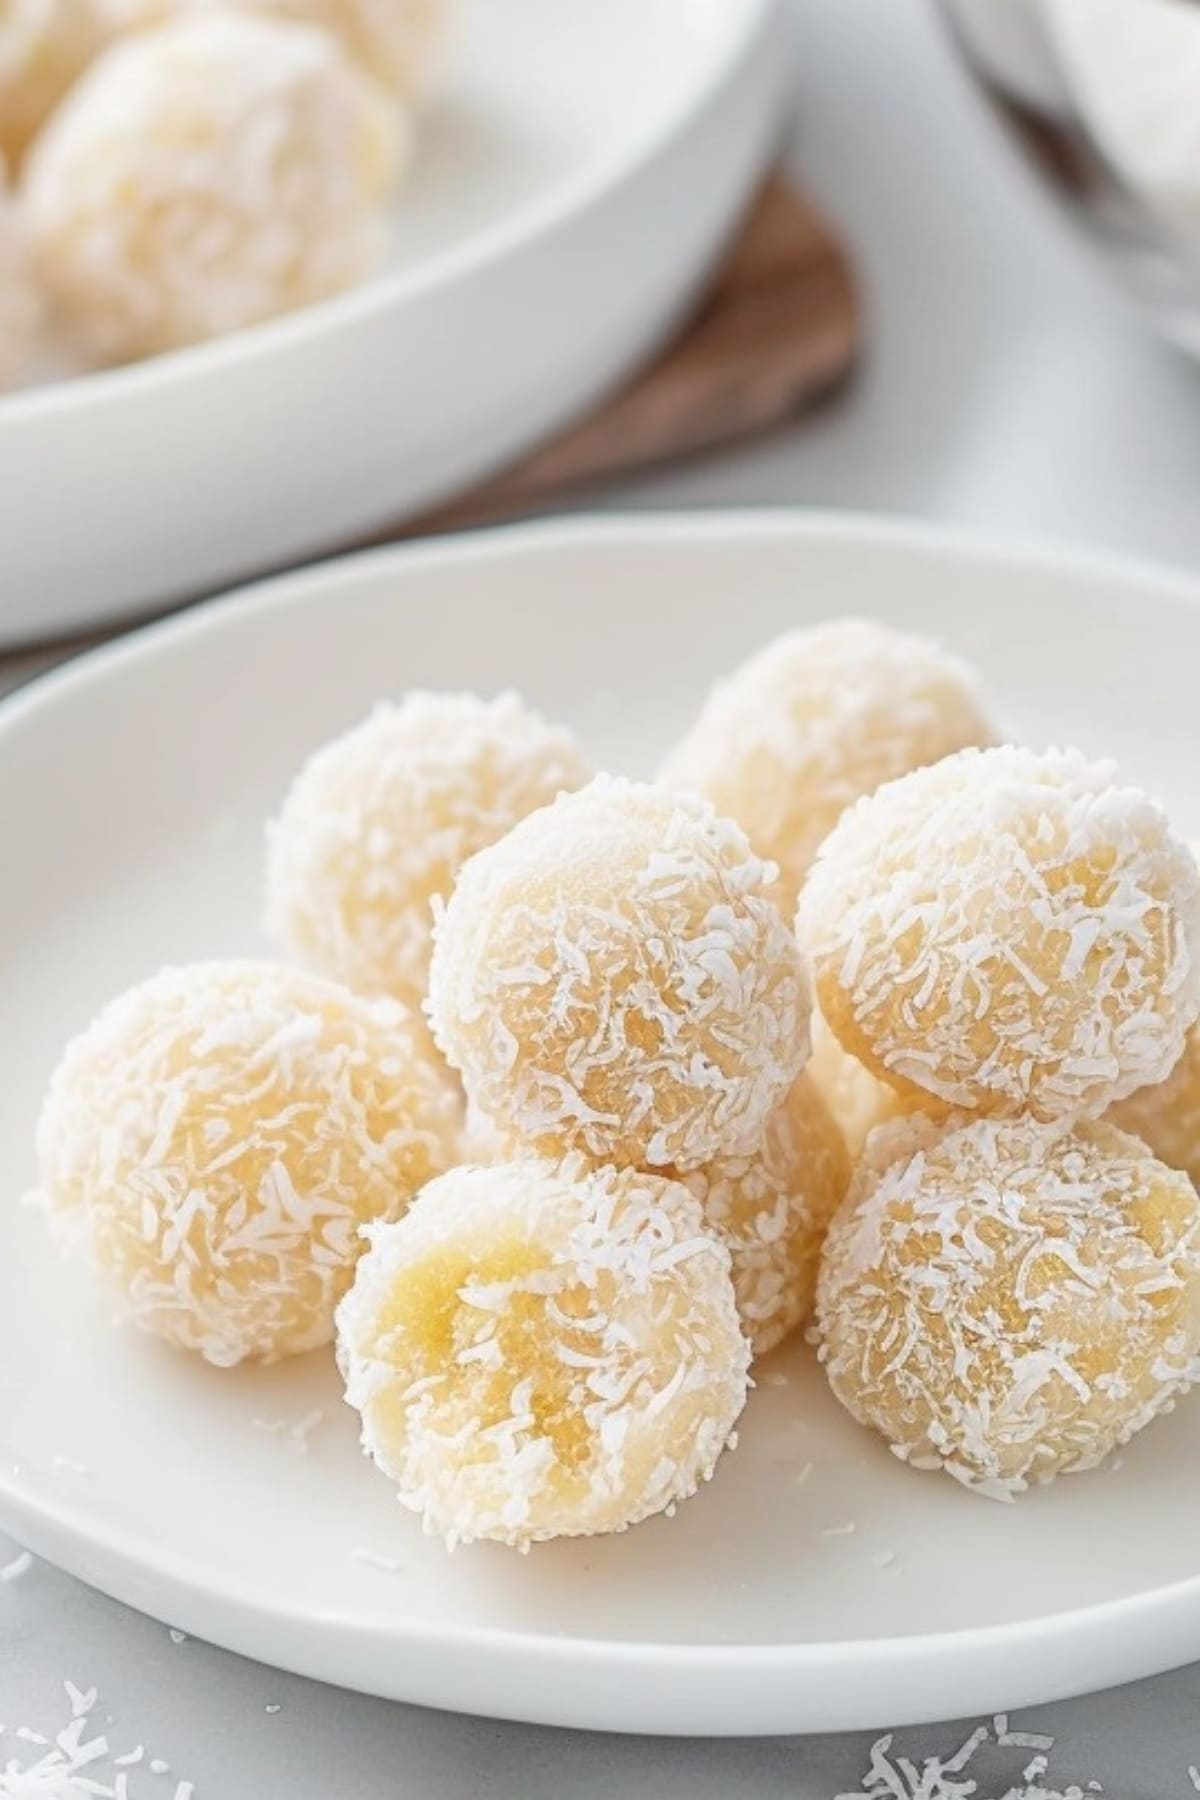 Shredded coconut coated dough balls in a white plate.